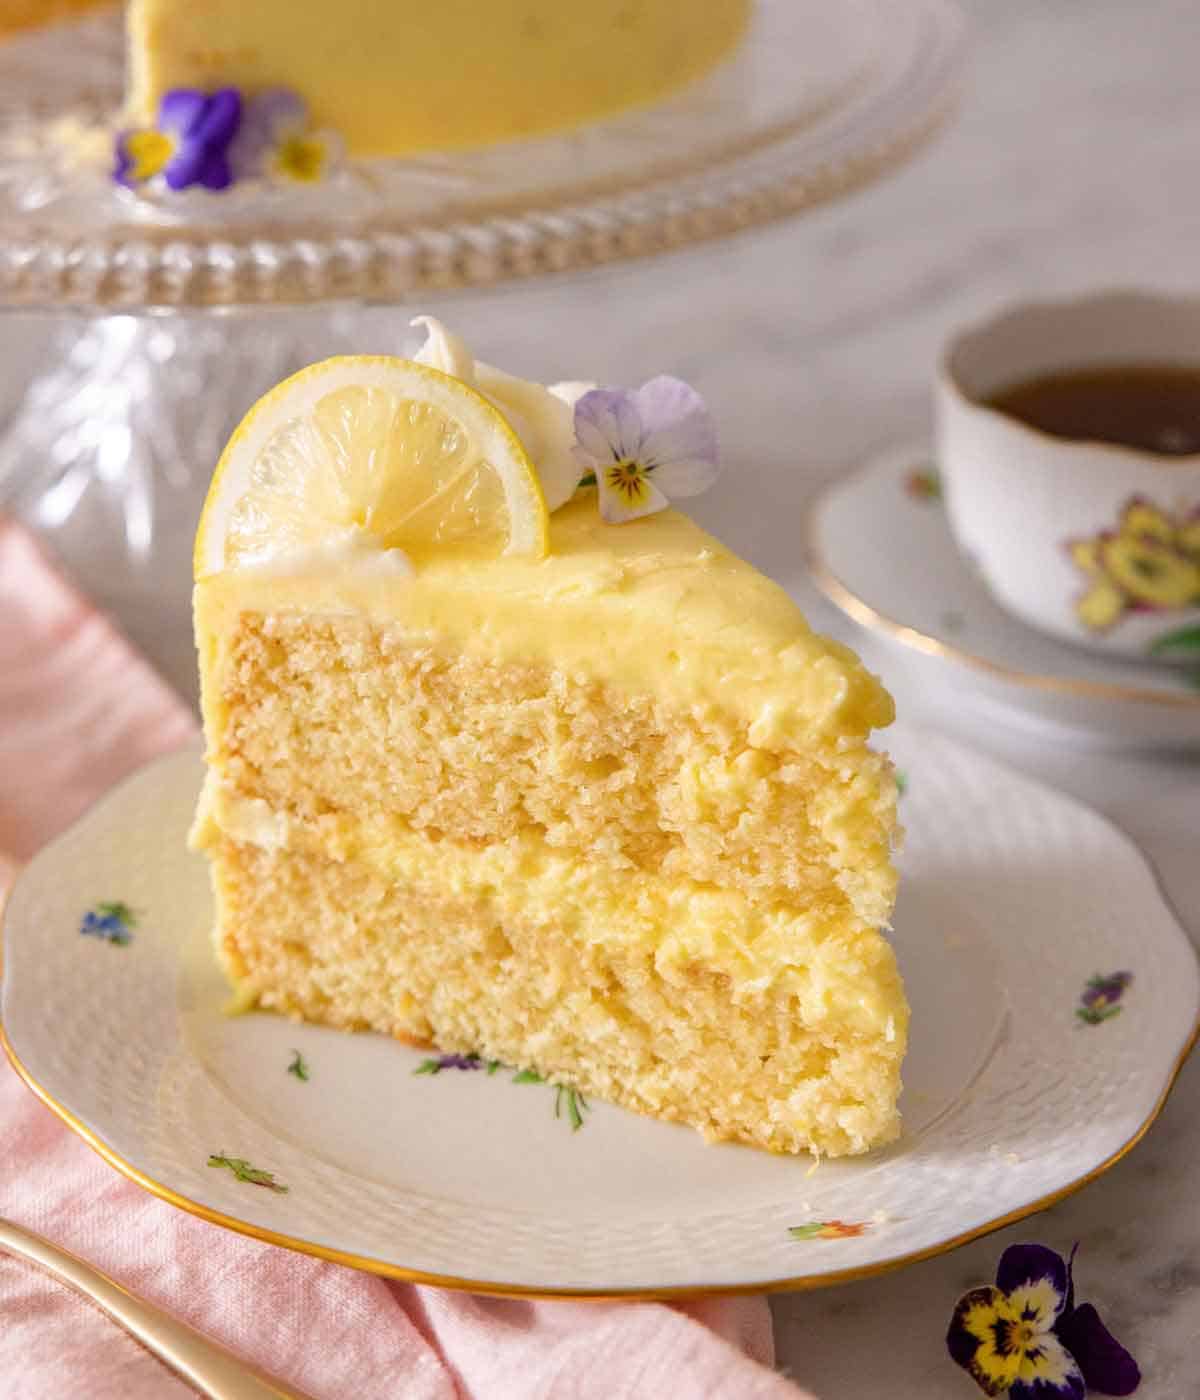 A slice of lemon cake with a slice of lemon on top with an edible flower for garnish.